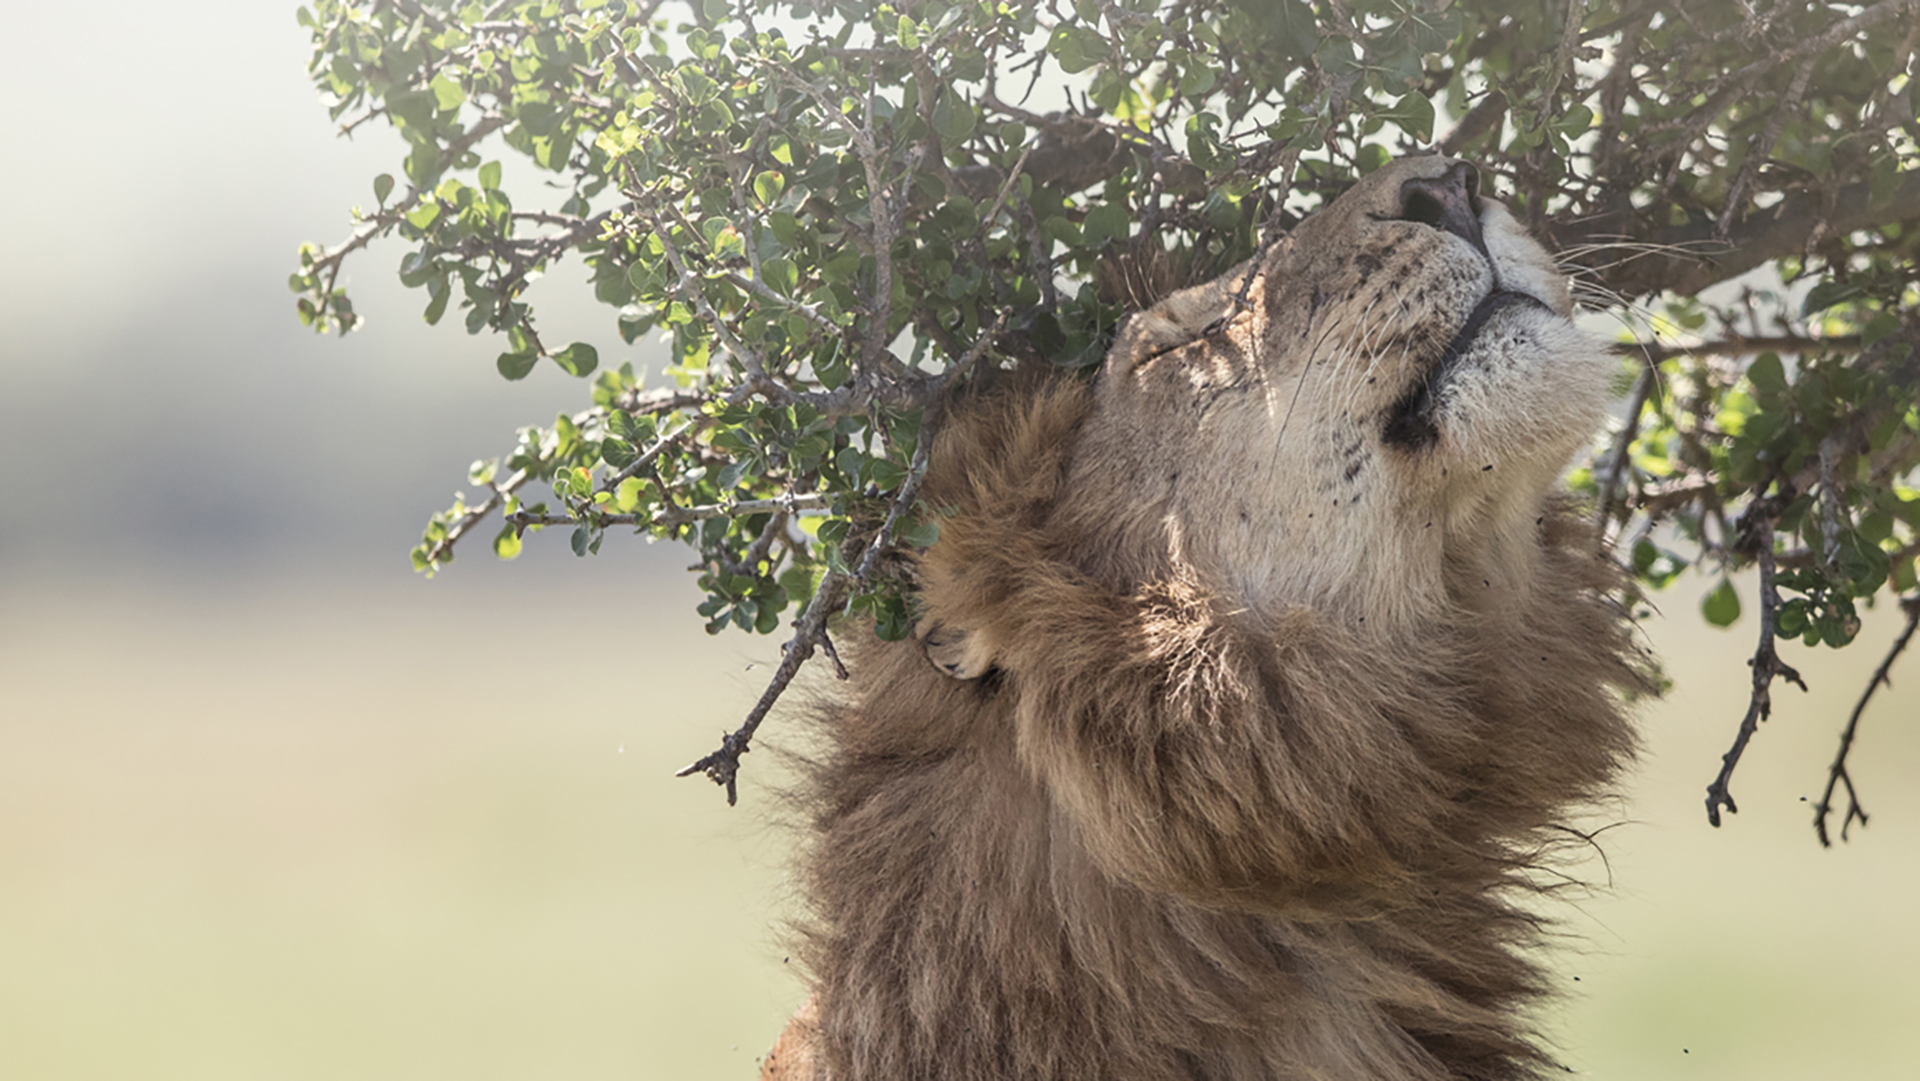 A lion leans up to sniff an overhanging tree branch